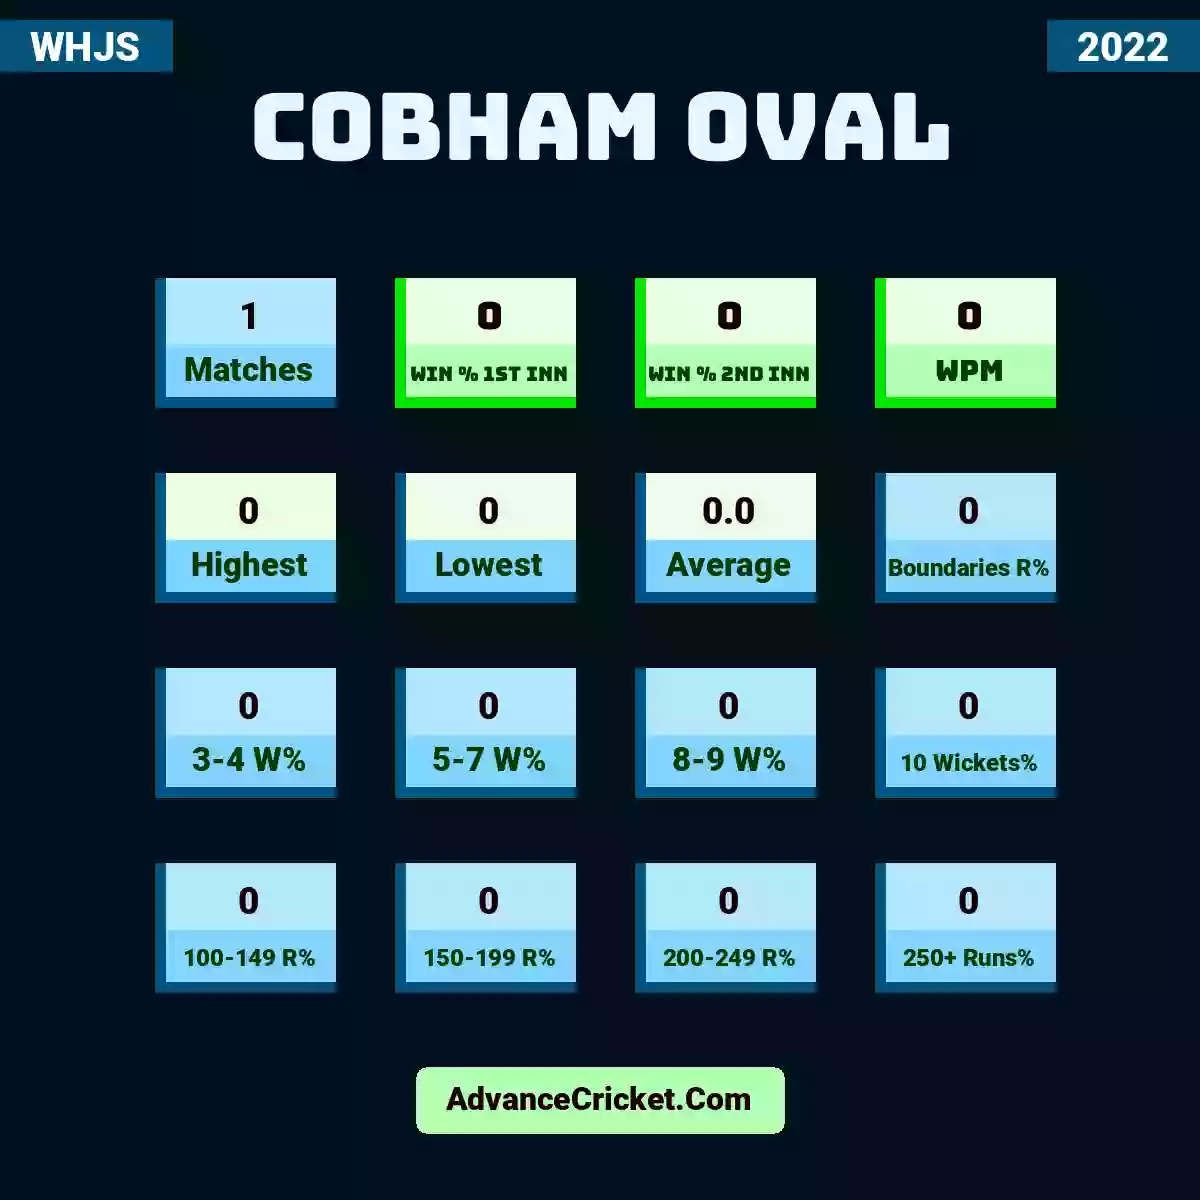 Image showing Cobham Oval with Matches: 1, Win % 1st Inn: 0, Win % 2nd Inn: 0, WPM: 0, Highest: 0, Lowest: 0, Average: 0.0, Boundaries R%: 0, 3-4 W%: 0, 5-7 W%: 0, 8-9 W%: 0, 10 Wickets%: 0, 100-149 R%: 0, 150-199 R%: 0, 200-249 R%: 0, 250+ Runs%: 0.